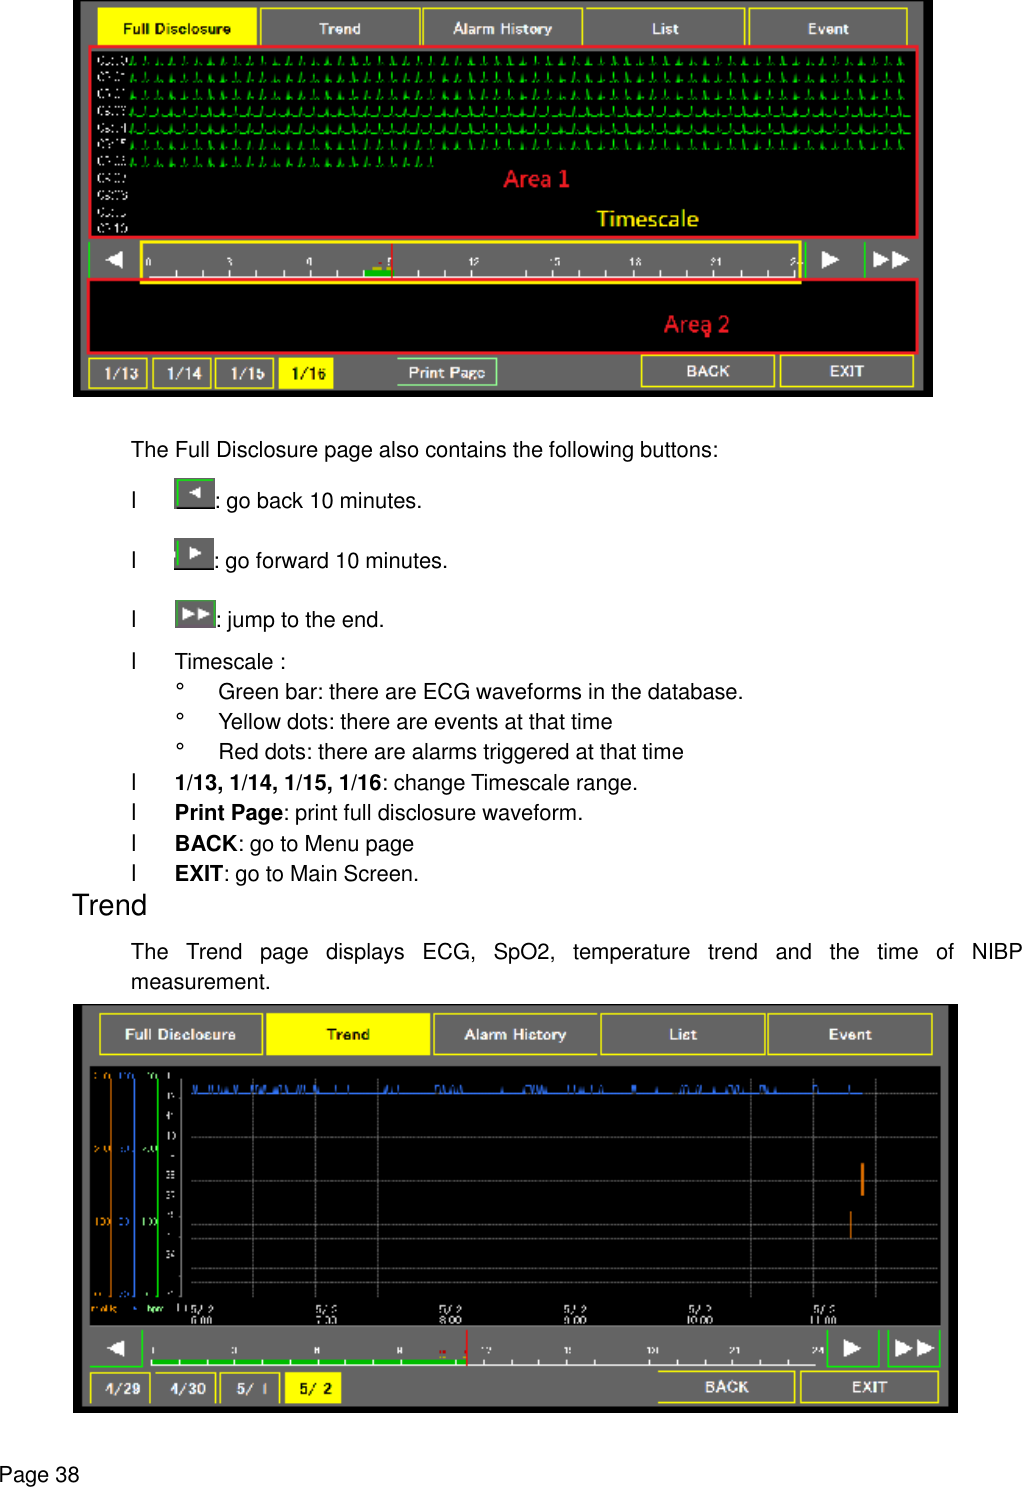    Page 38  The Full Disclosure page also contains the following buttons: l  : go back 10 minutes.  l : go forward 10 minutes. l  : jump to the end. l Timescale : ¡ Green bar: there are ECG waveforms in the database. ¡ Yellow dots: there are events at that time ¡ Red dots: there are alarms triggered at that time l 1/13, 1/14, 1/15, 1/16: change Timescale range. l Print Page: print full disclosure waveform. l BACK: go to Menu page l EXIT: go to Main Screen. Trend The Trend page displays ECG, SpO2, temperature trend and the time of NIBP measurement.  